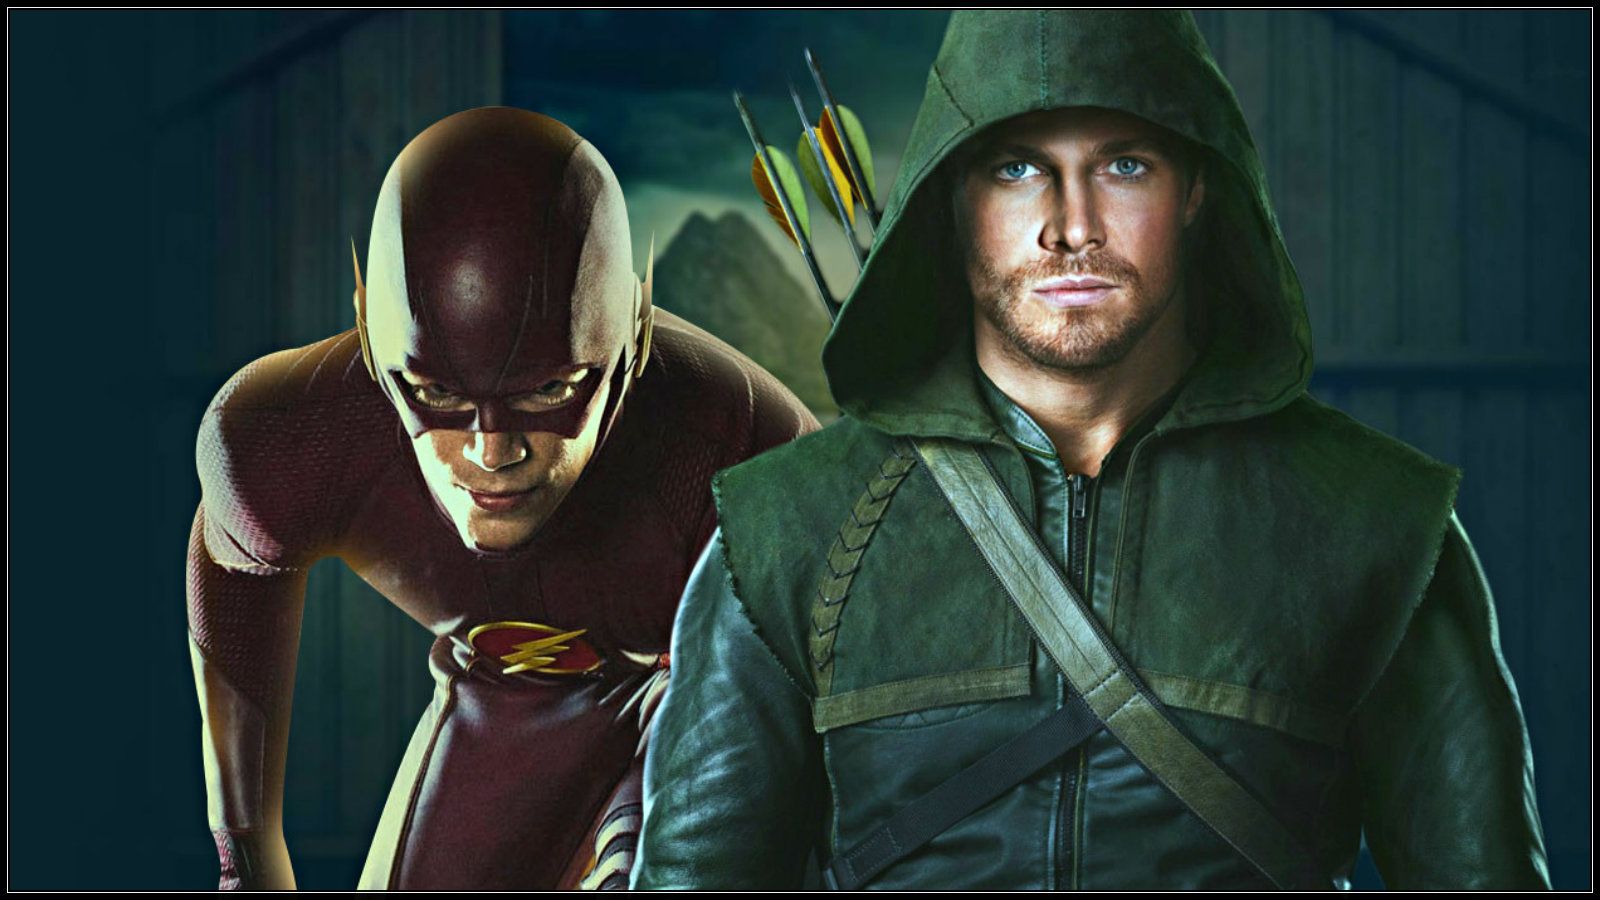 The Flash and Arrow crossover - The Flash (CW) Wallpaper (37771514 ...